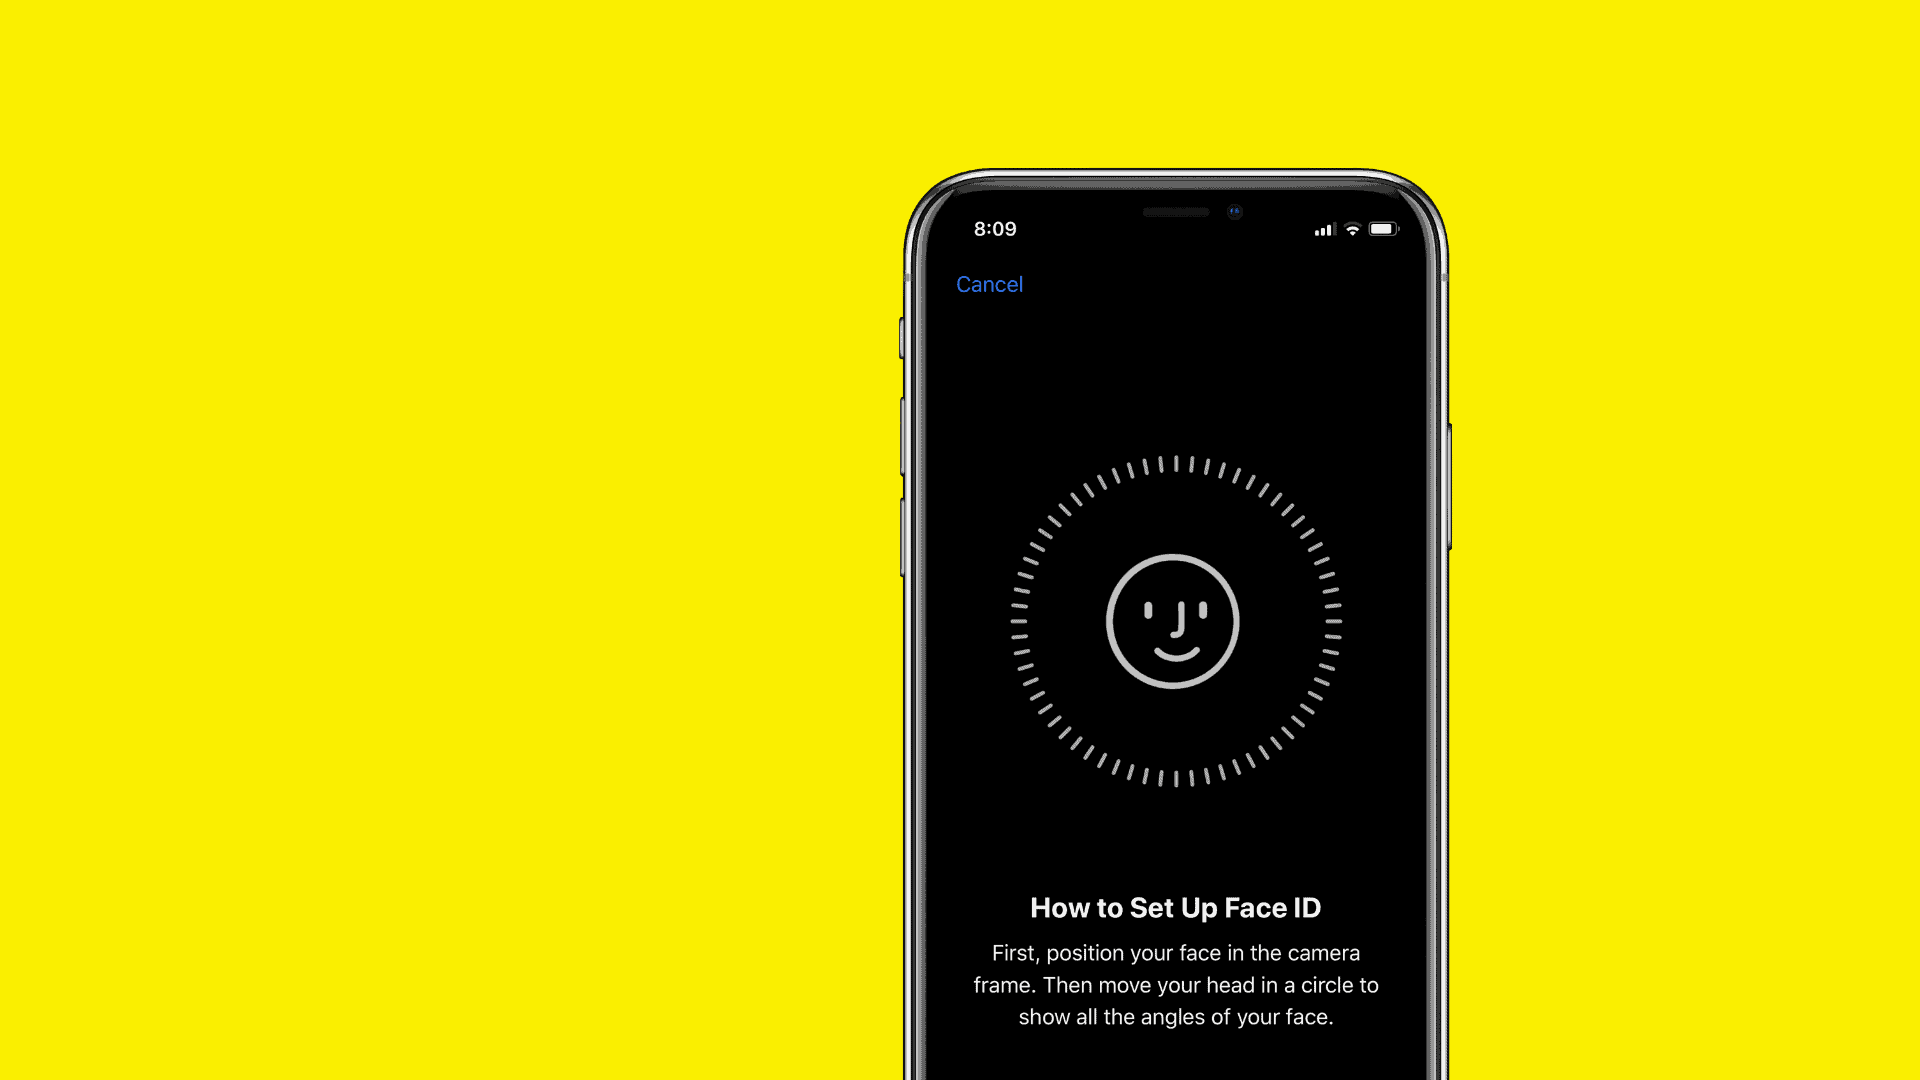 How to add multiple faces to Face ID on iPhone X running iOS 12